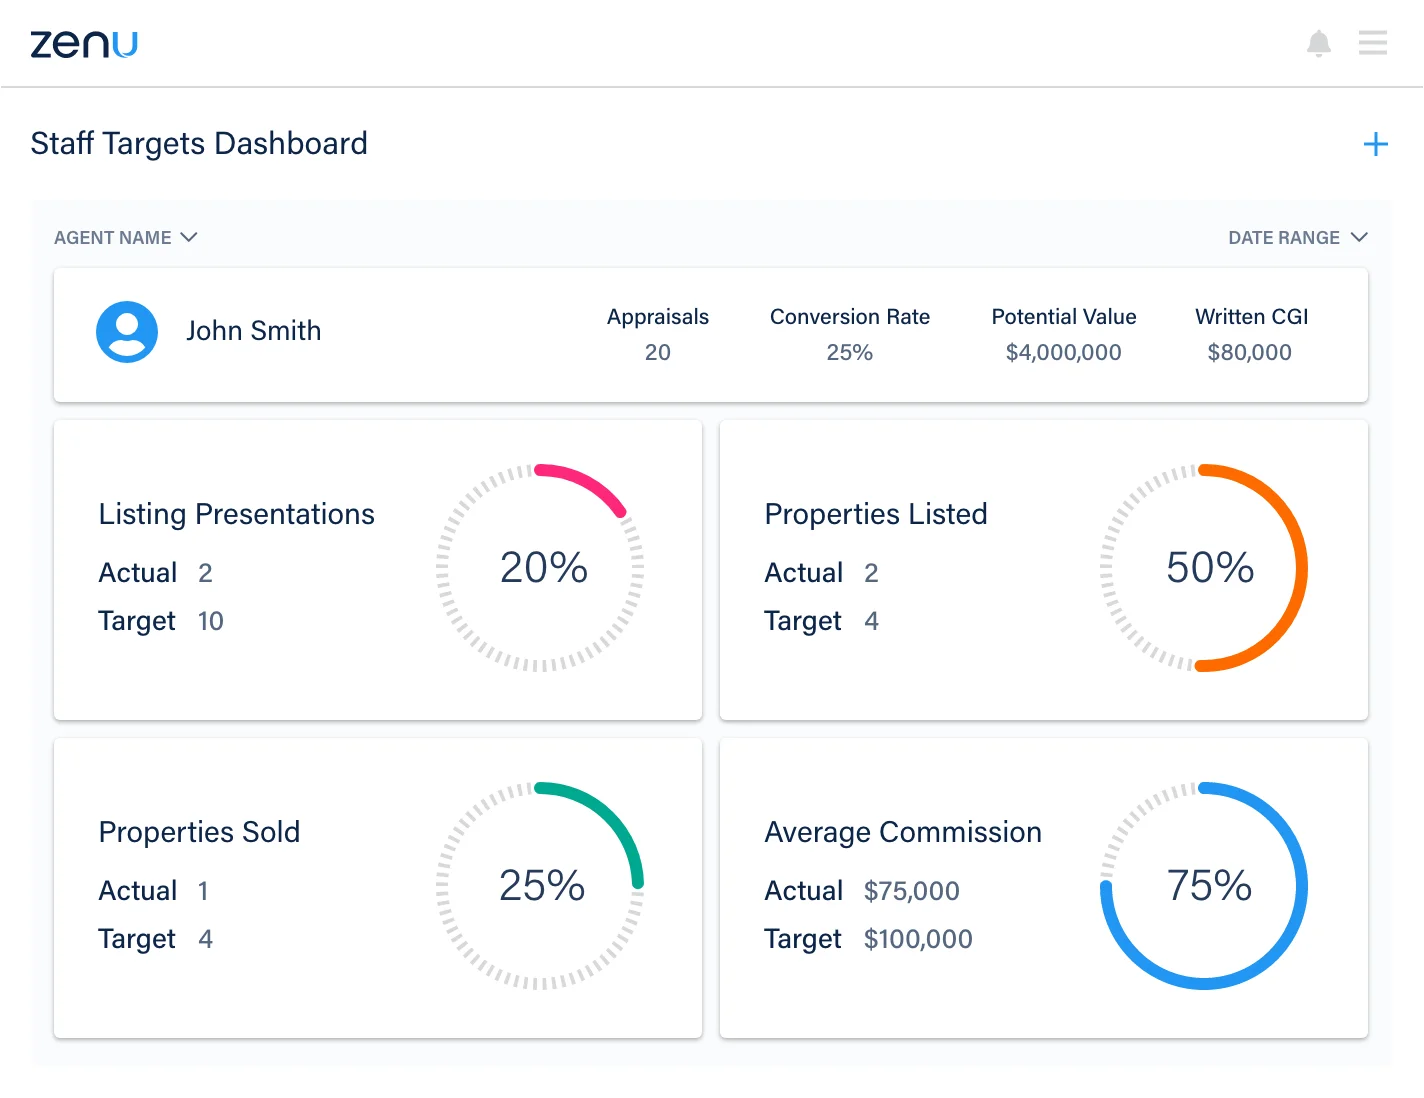 Image of Zenu CRM Real Estate Software Performance metrics and staff dashboards, real time analytics for team members and competitors including Live dashboard reporting, Coaching opportunities, Integrated property data